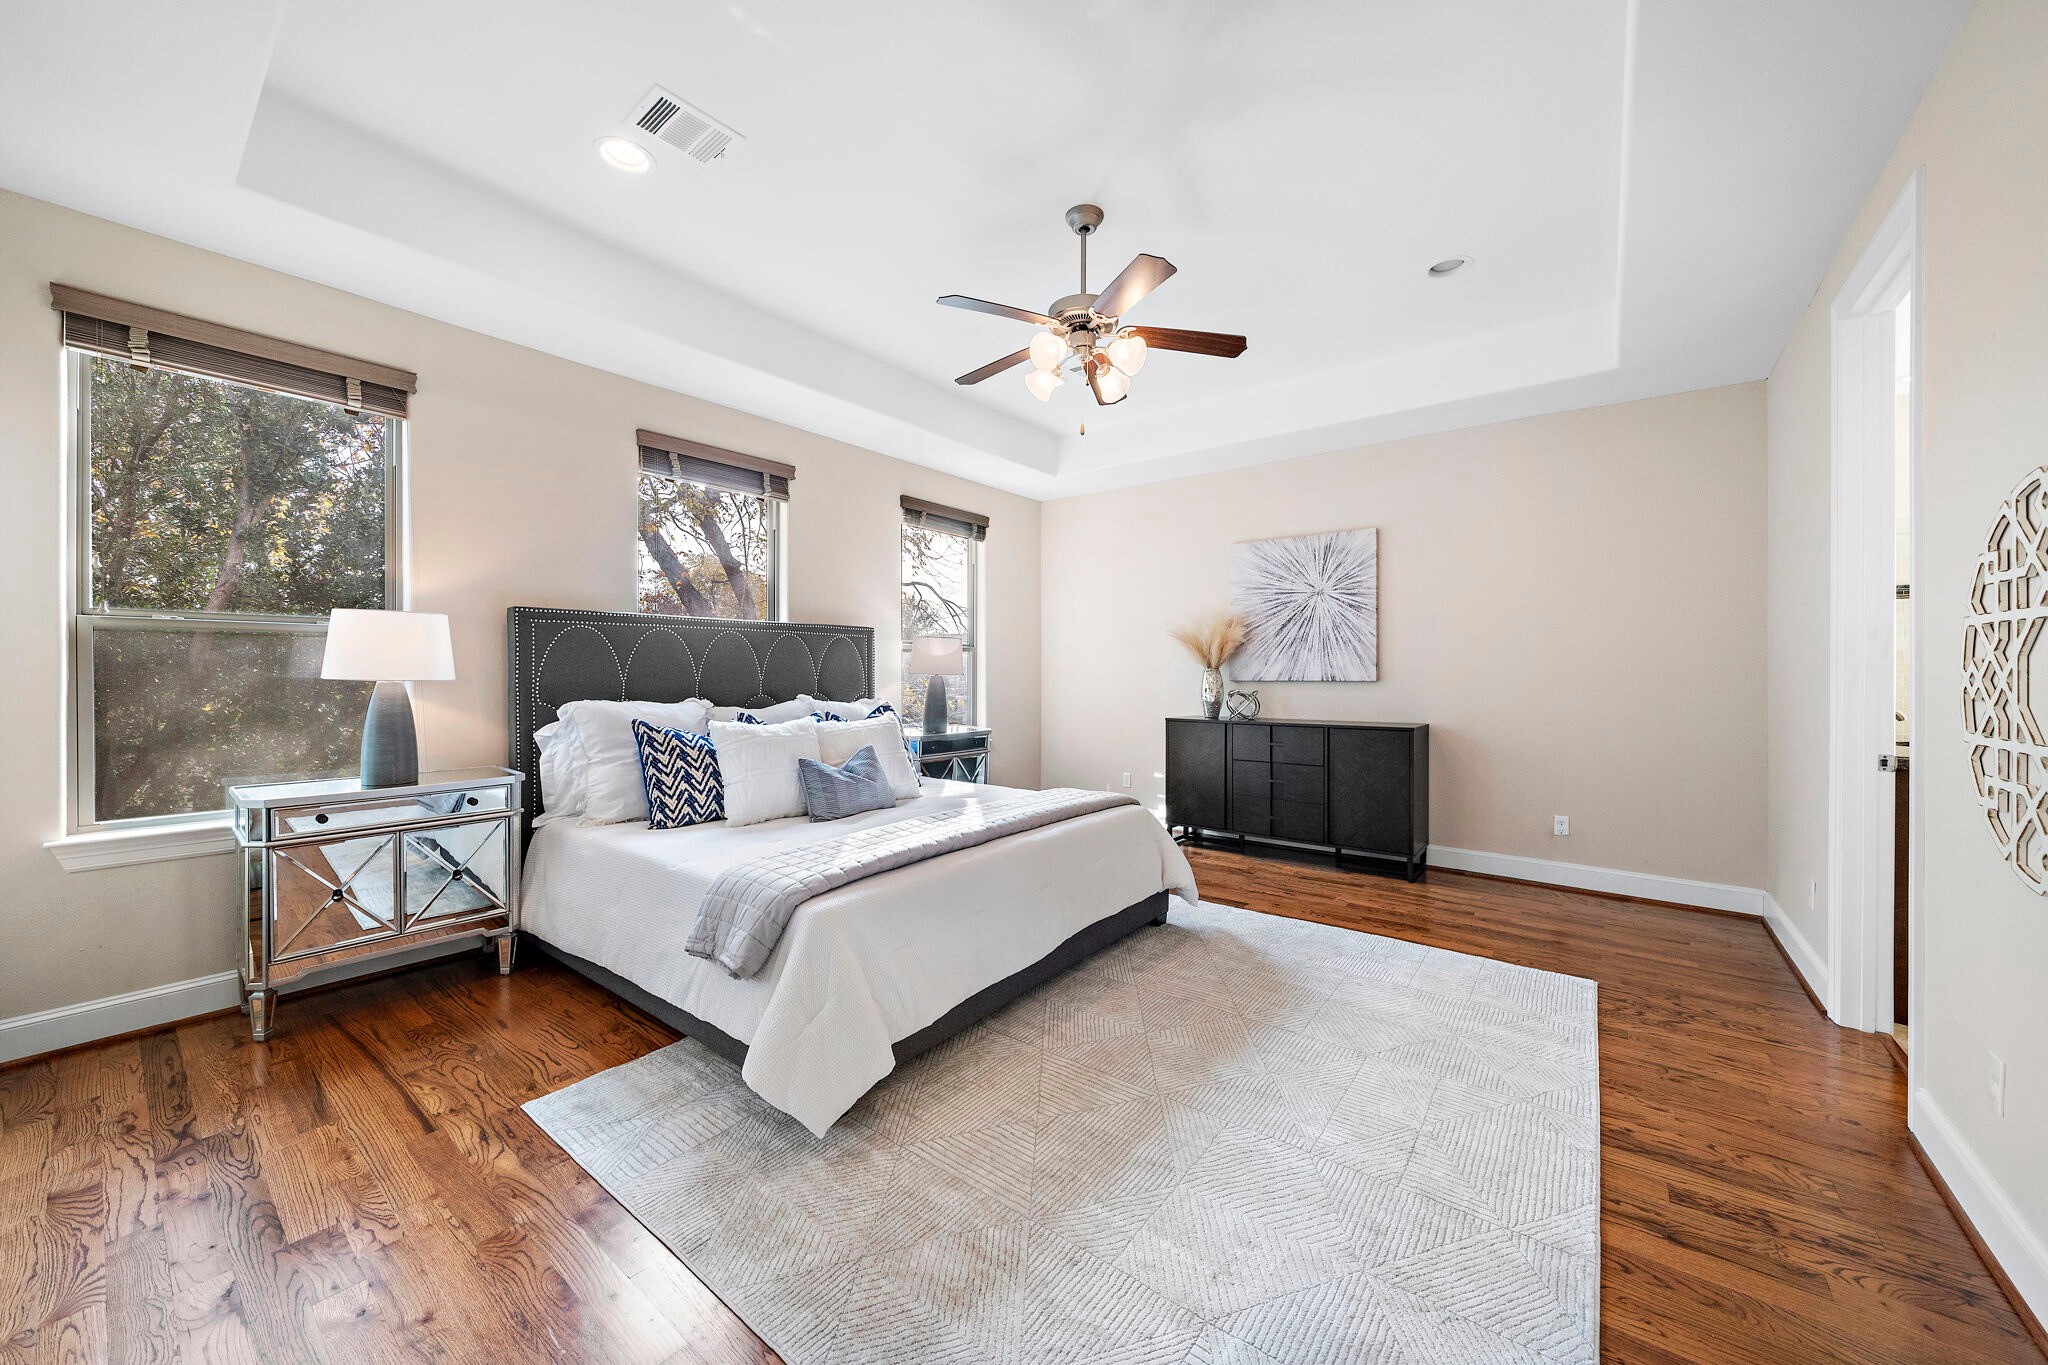 Made for ultimate comfort, the primary suite offers ample floor space, multiple windows overlooking lush neighborhood trees, and timeless finishes throughout.